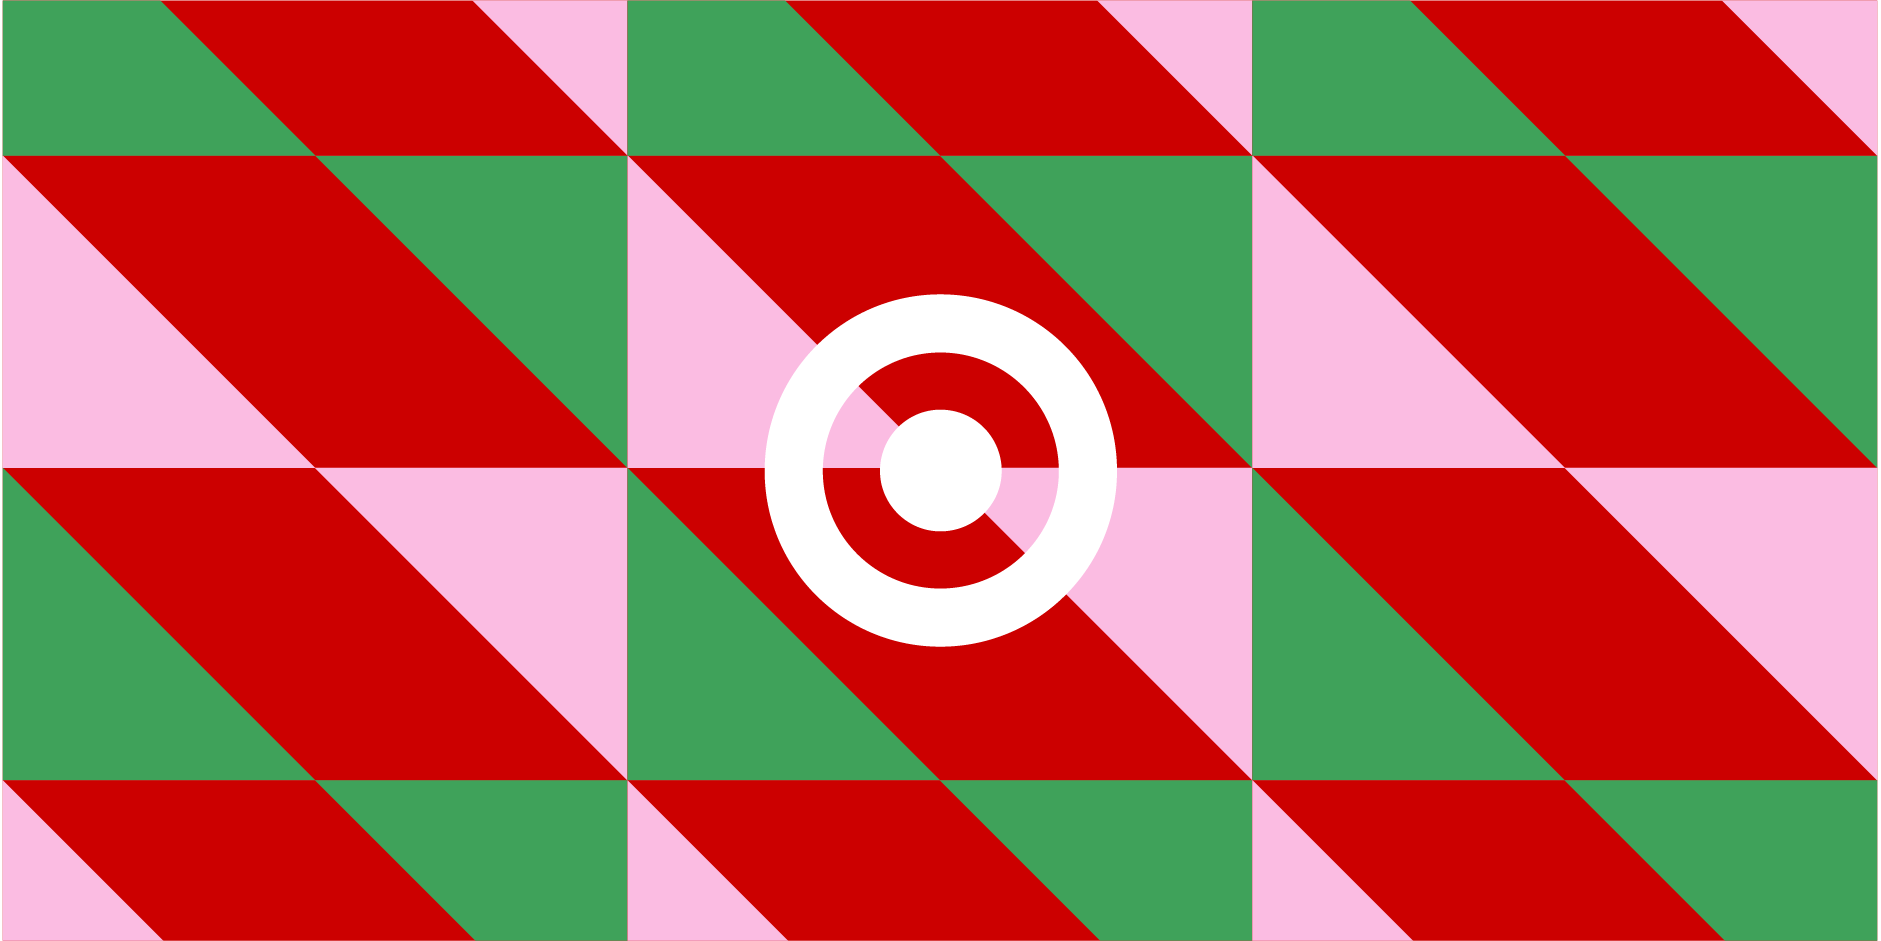 Holiday graphic with green, red and pink diamond shapes, and a white Target logo.